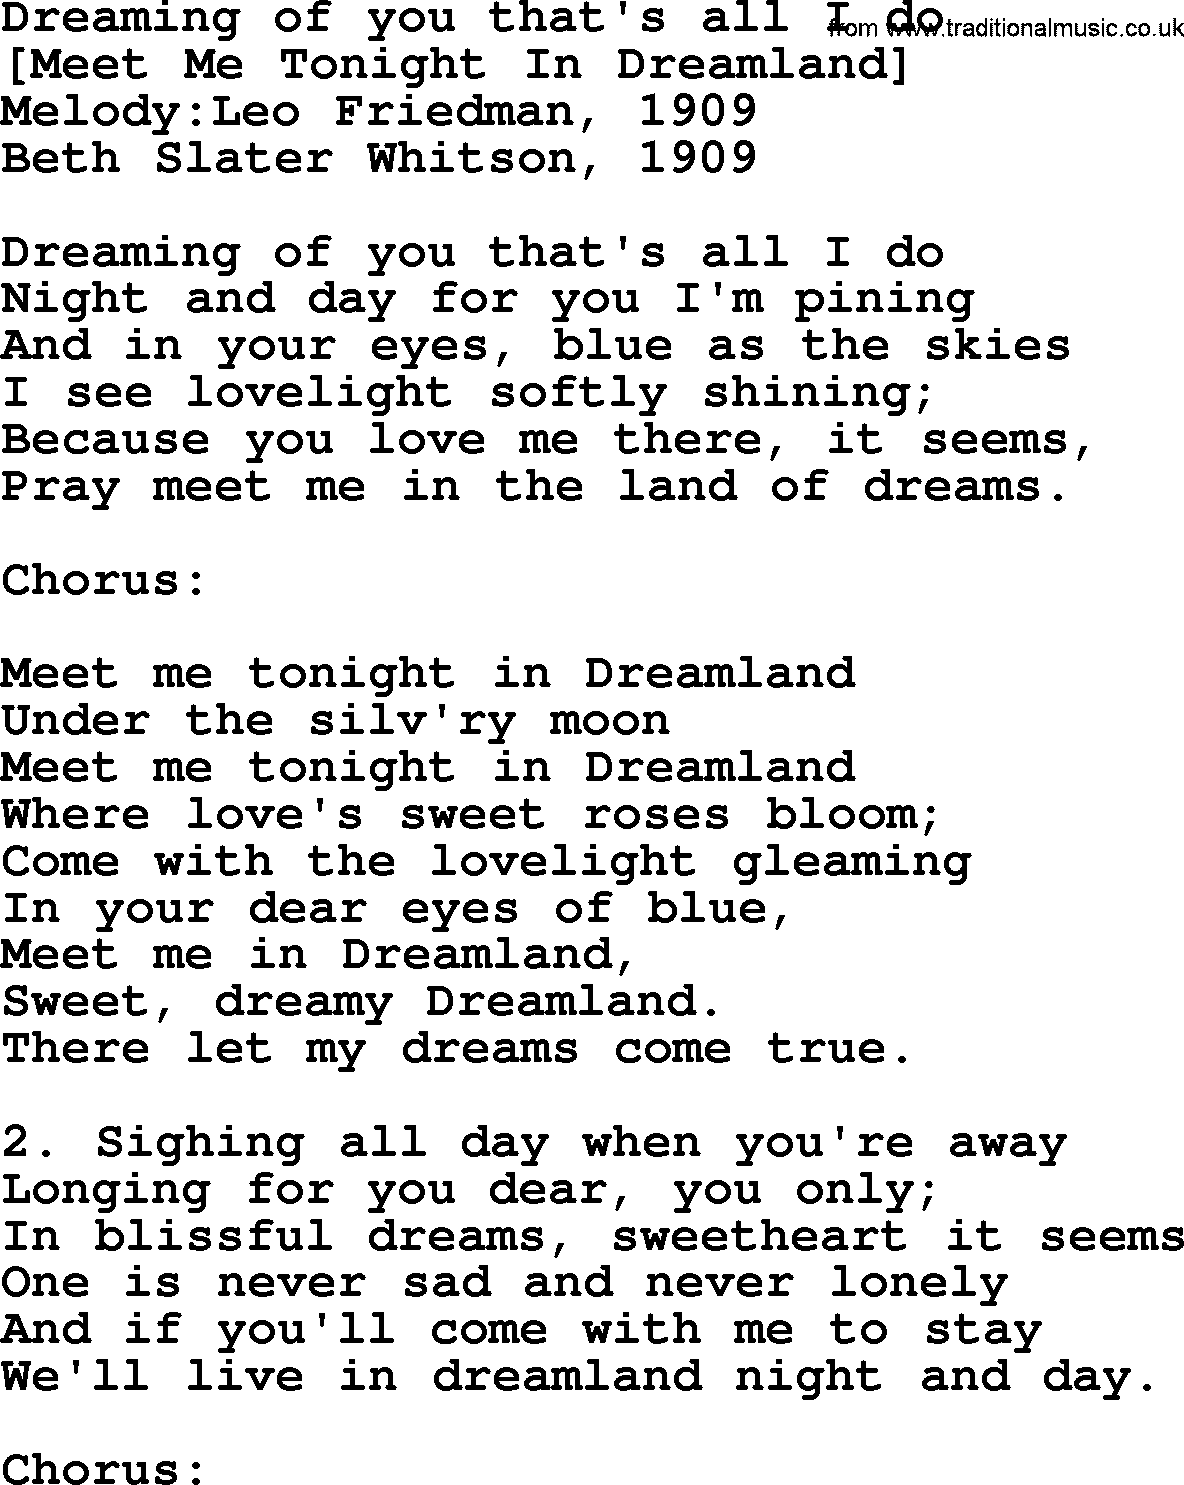 Old American Song: Dreaming Of You That's All I Do, lyrics